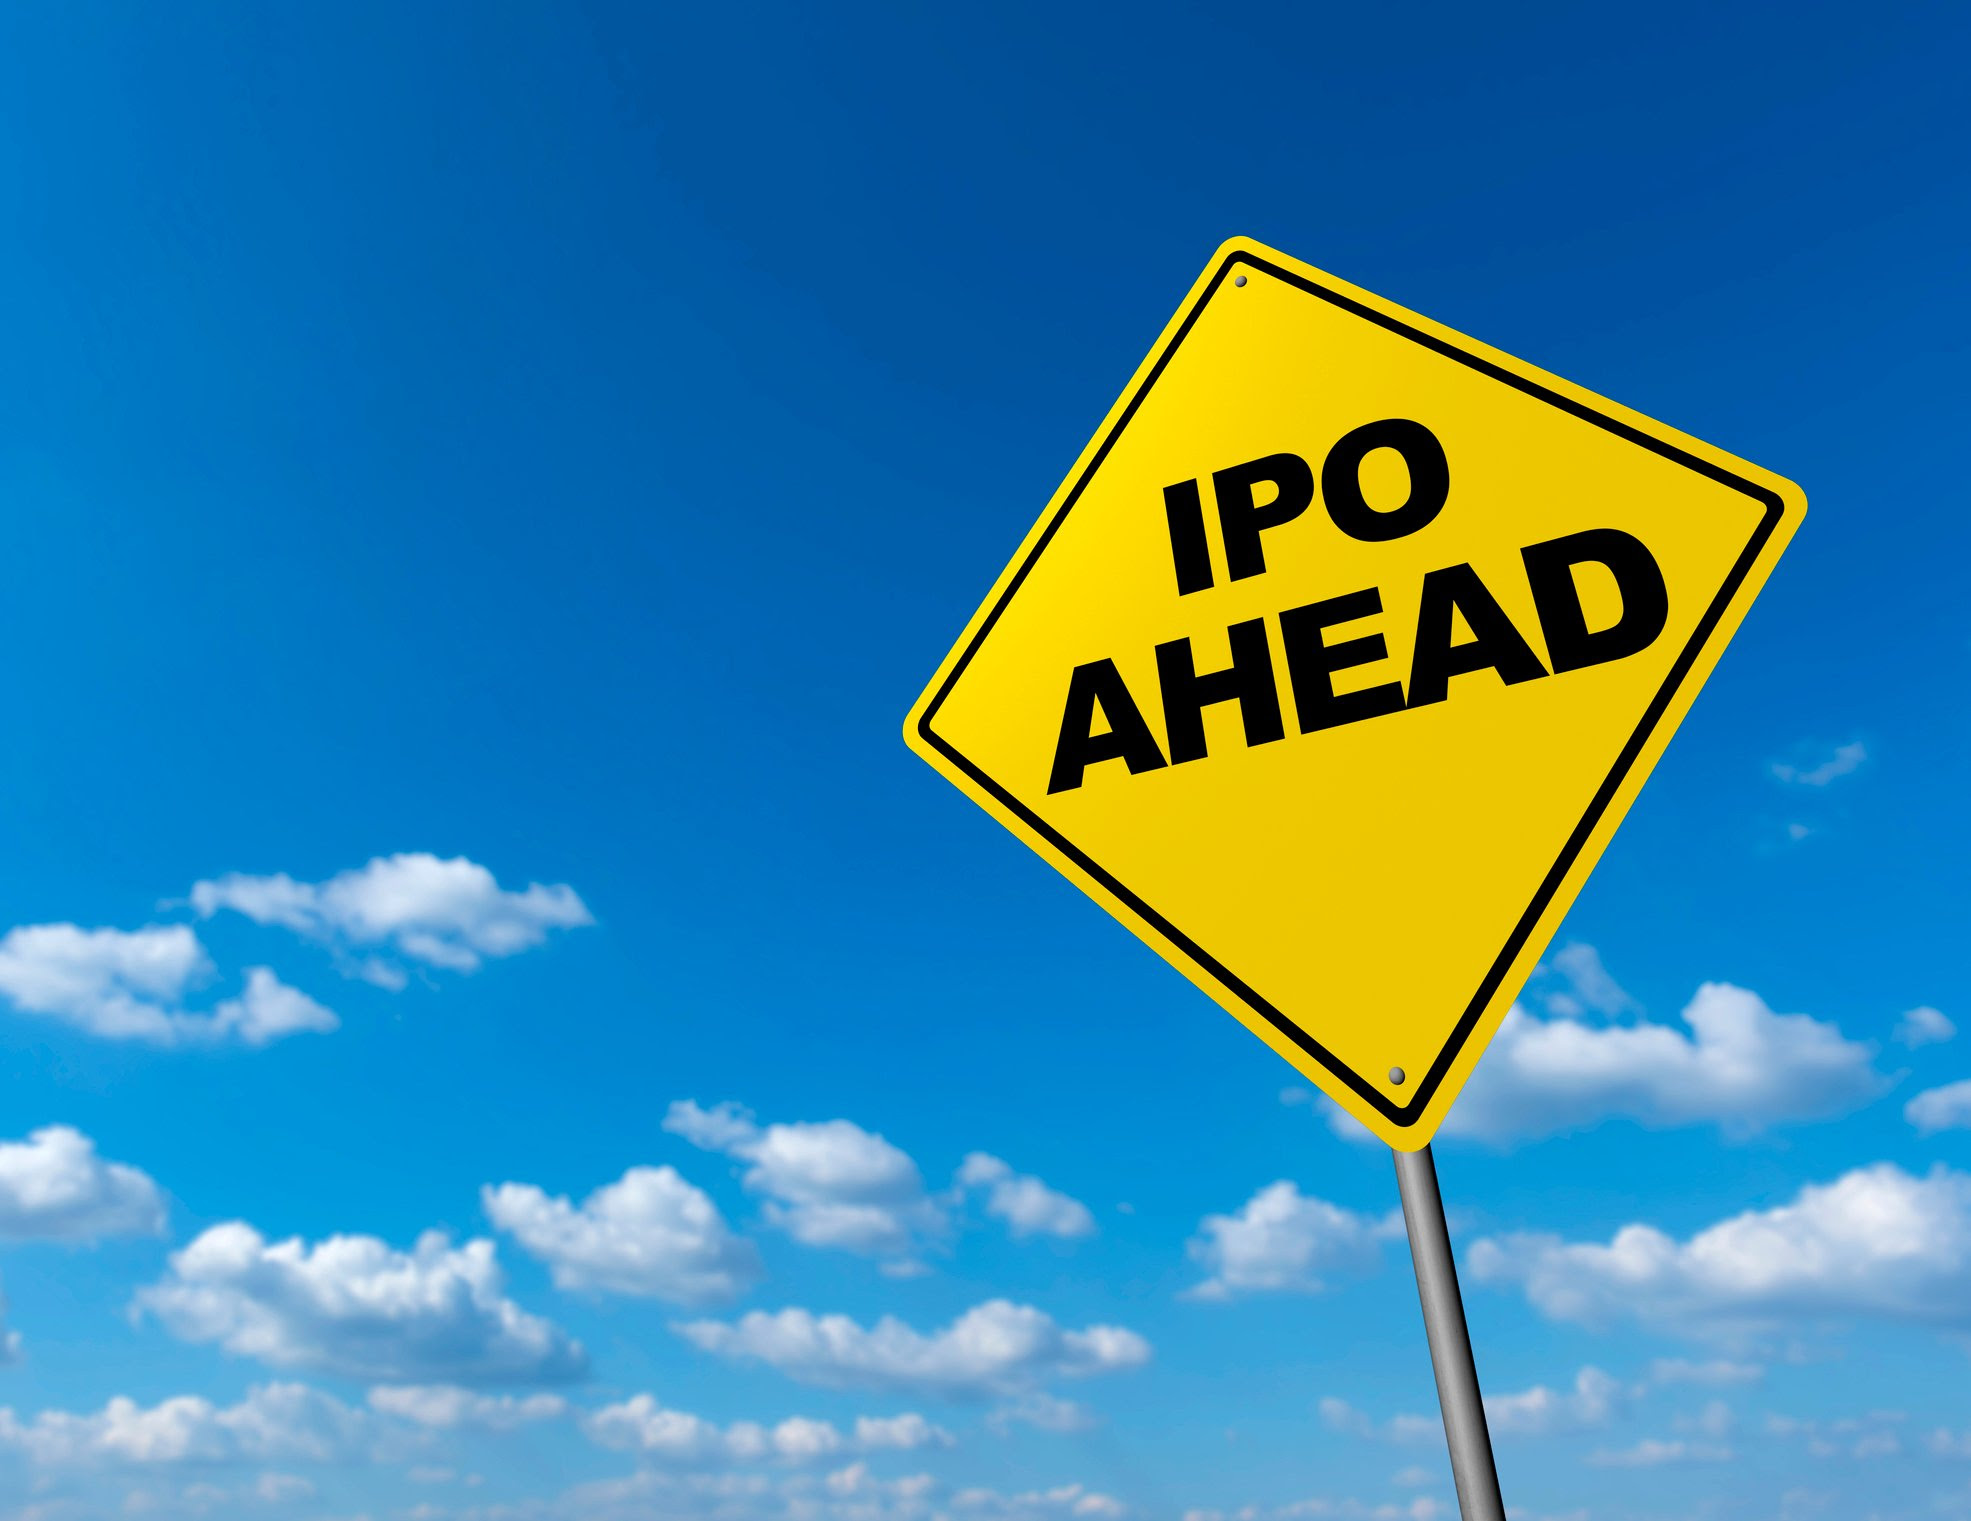 5 IPOs you can look forward to this year